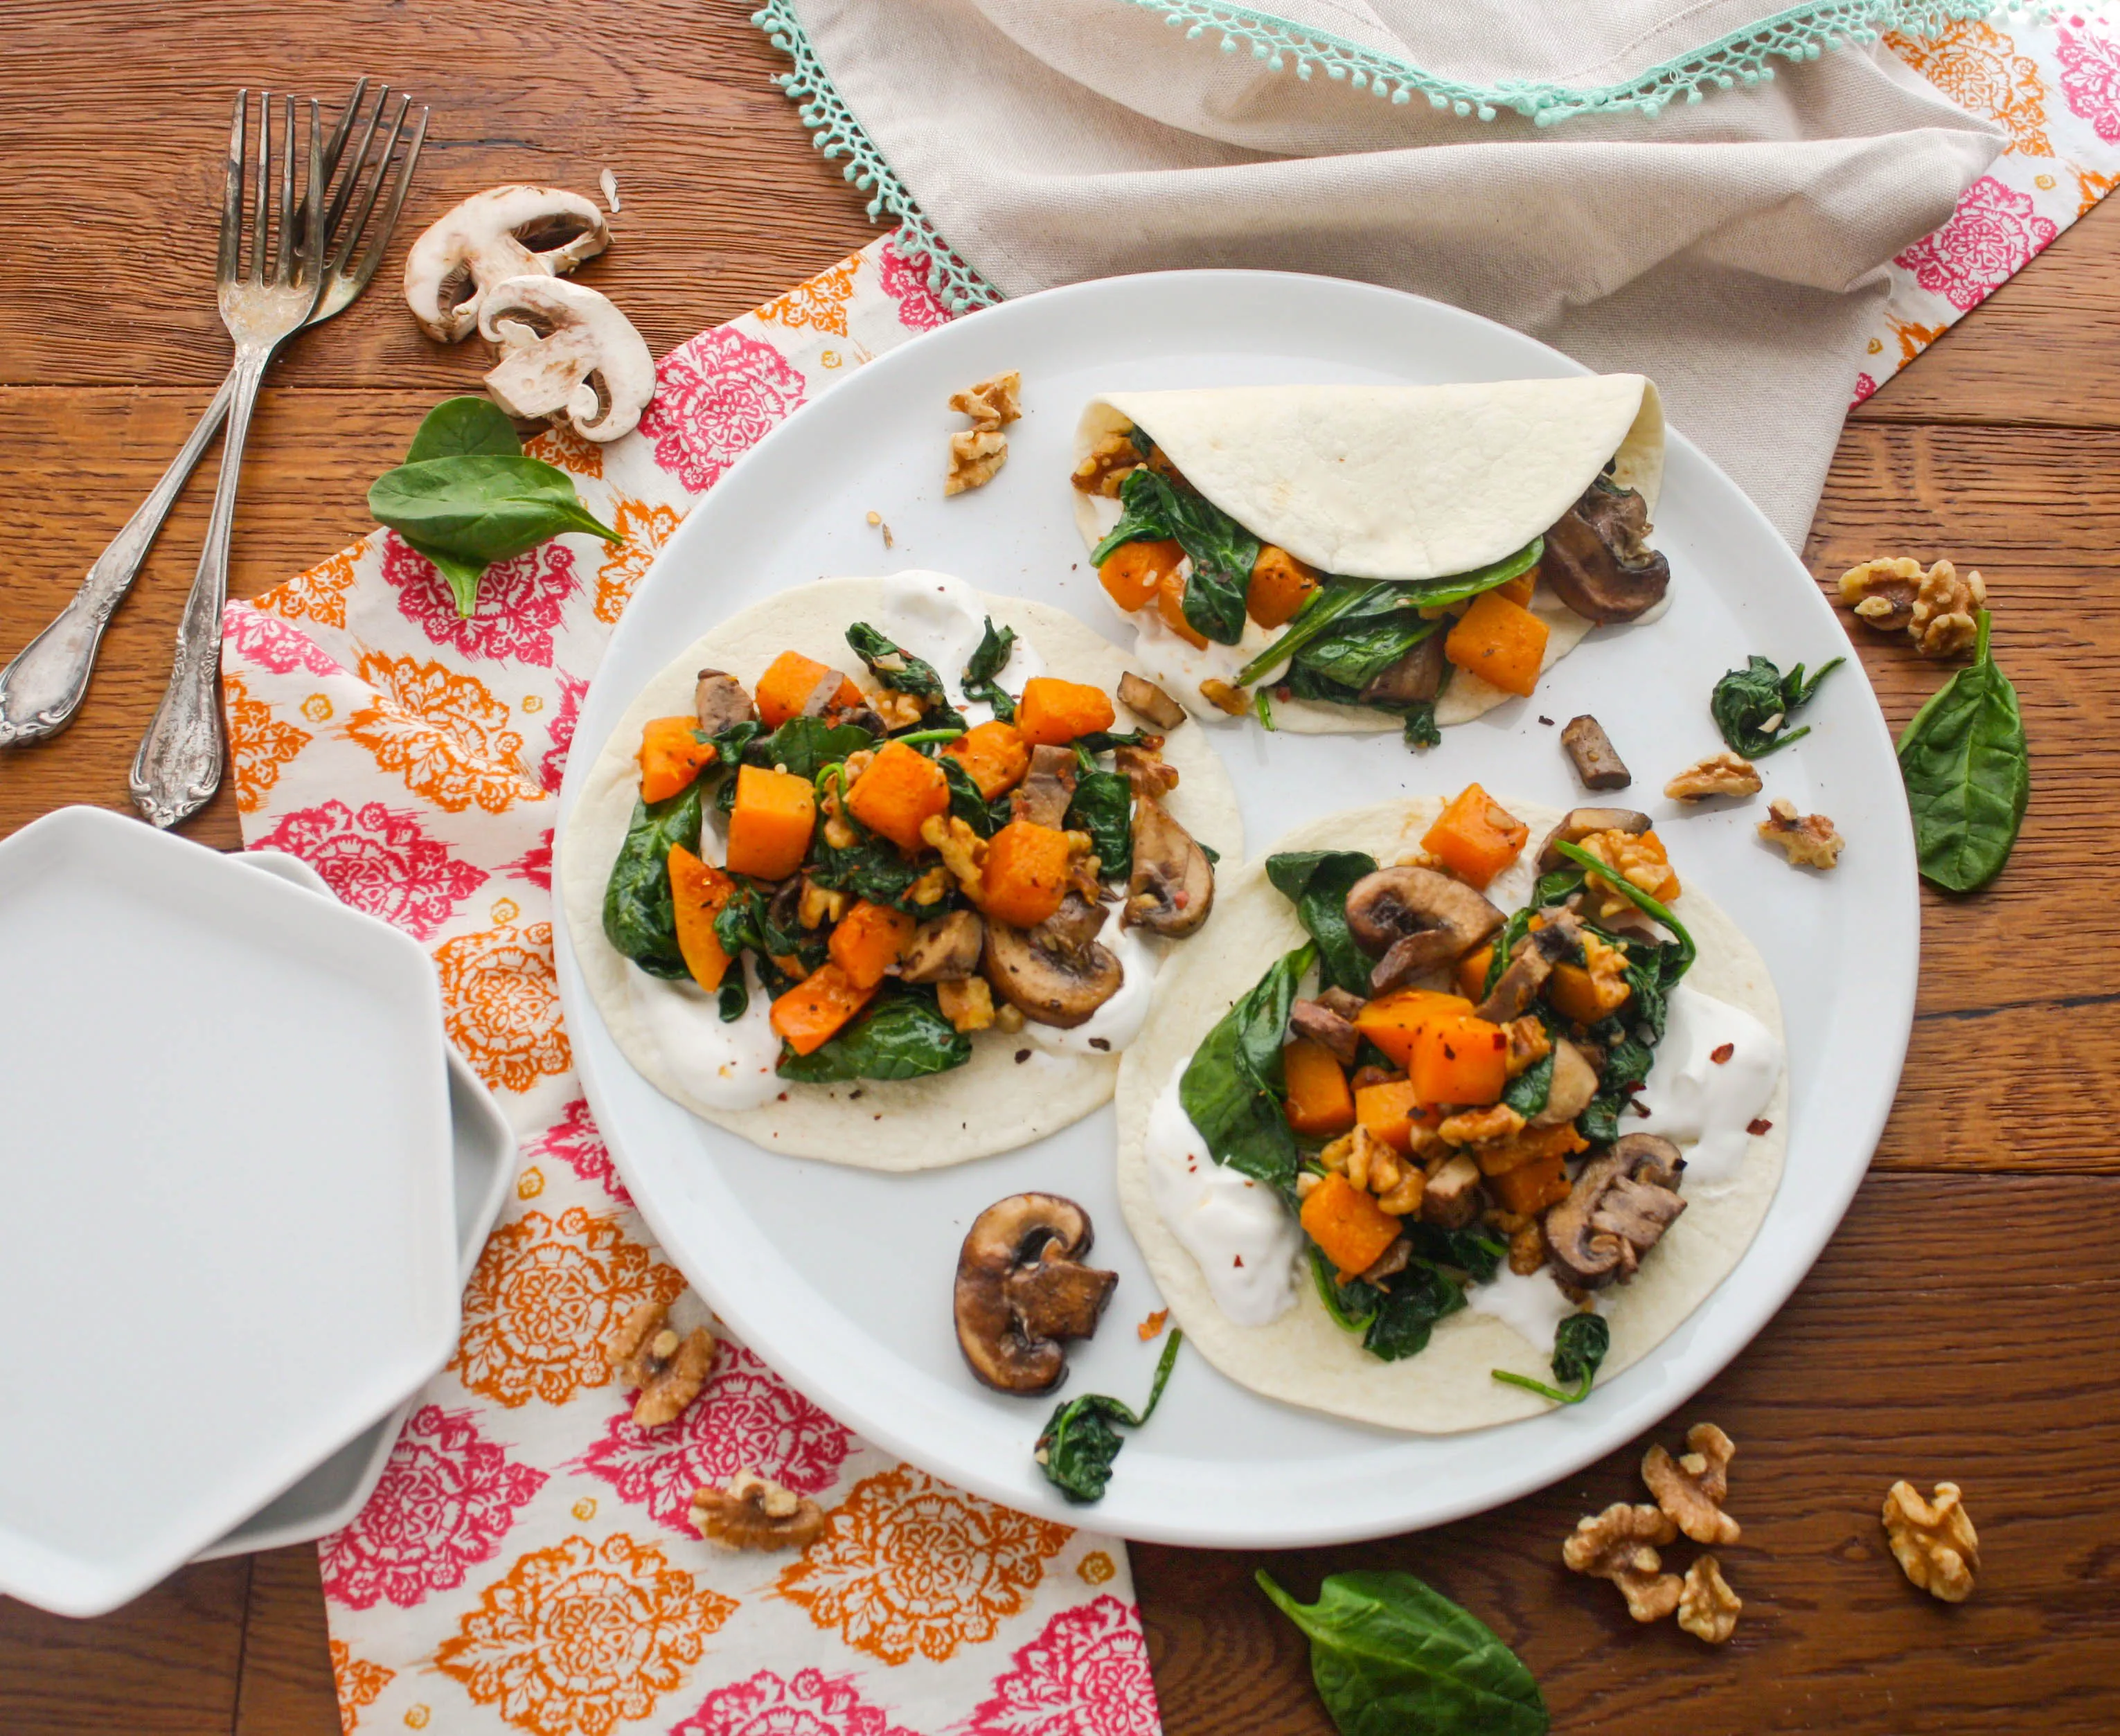 Butternut Squash, Spinach, and Mushroom Tacos are a tasty vegetarian and seasonal meal. You'll love these tacos!